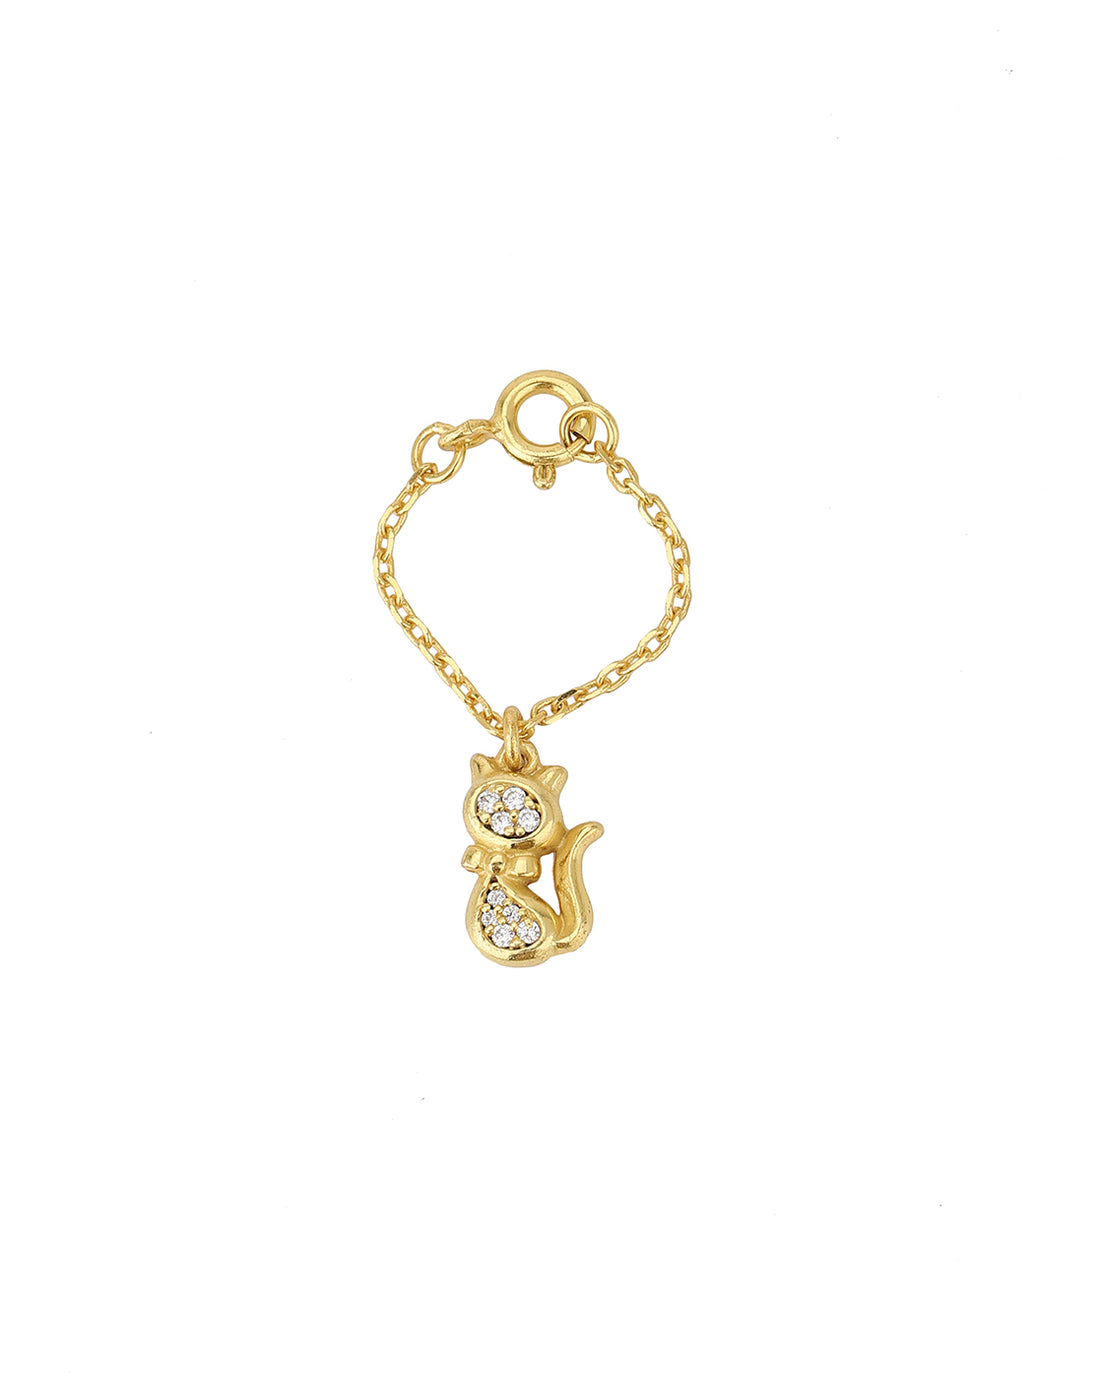 Carlton London Gold Plated Cz Studded Cat Shape Watch Charm For Women